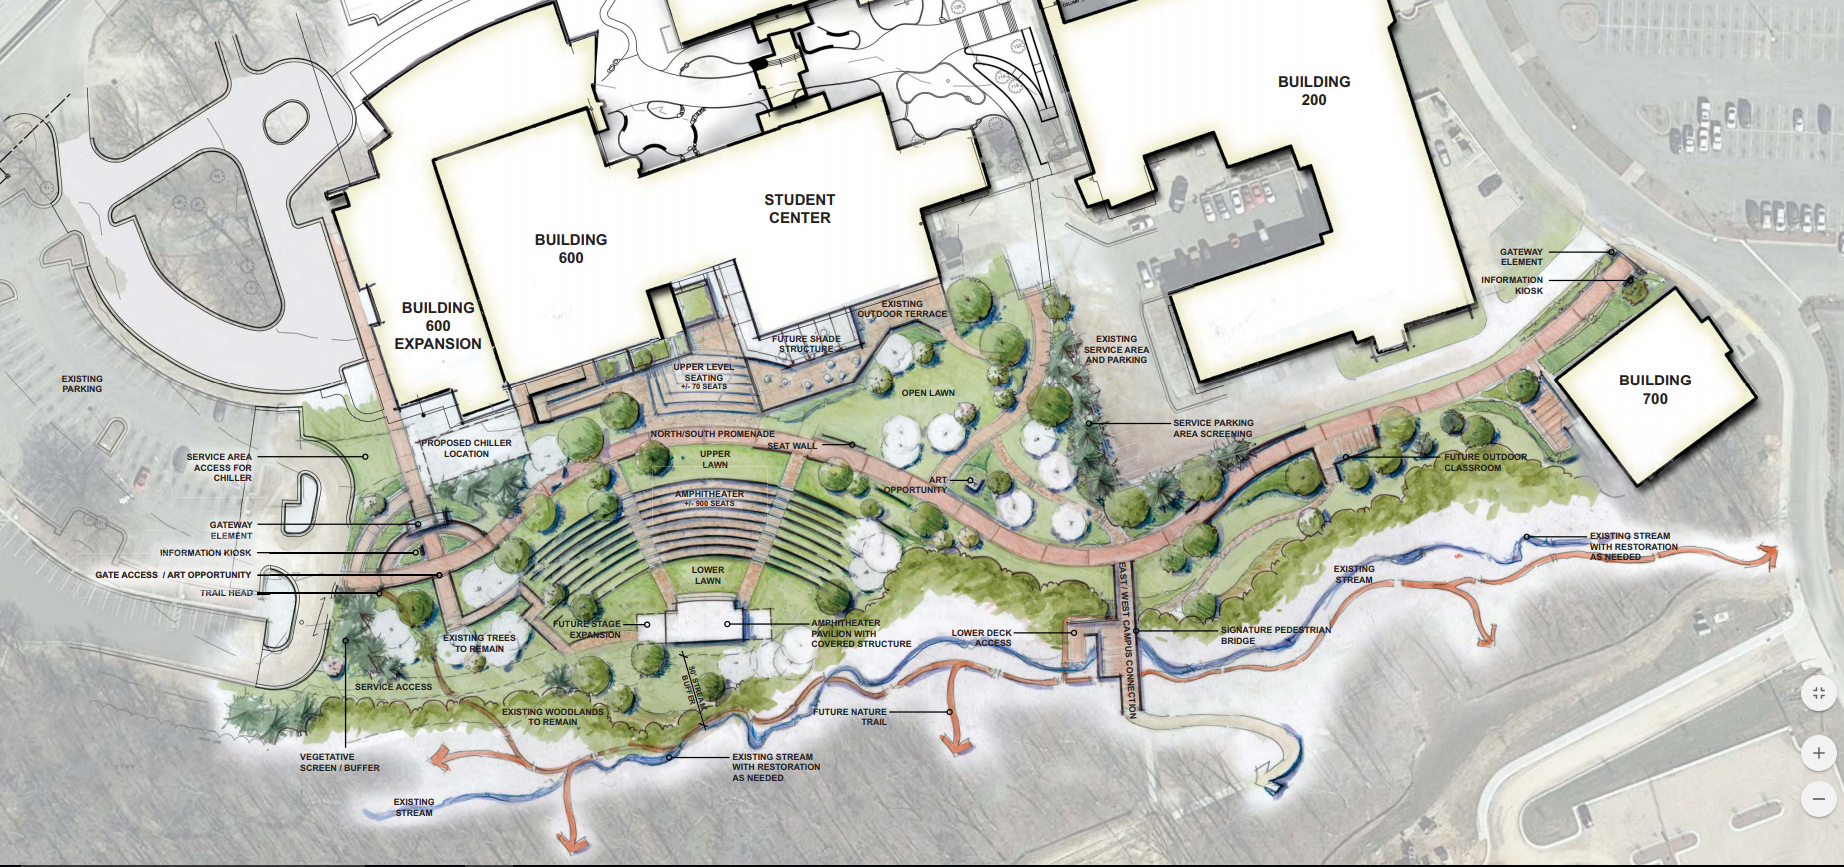 Outdoor Learning Center Conceptual Site Plan